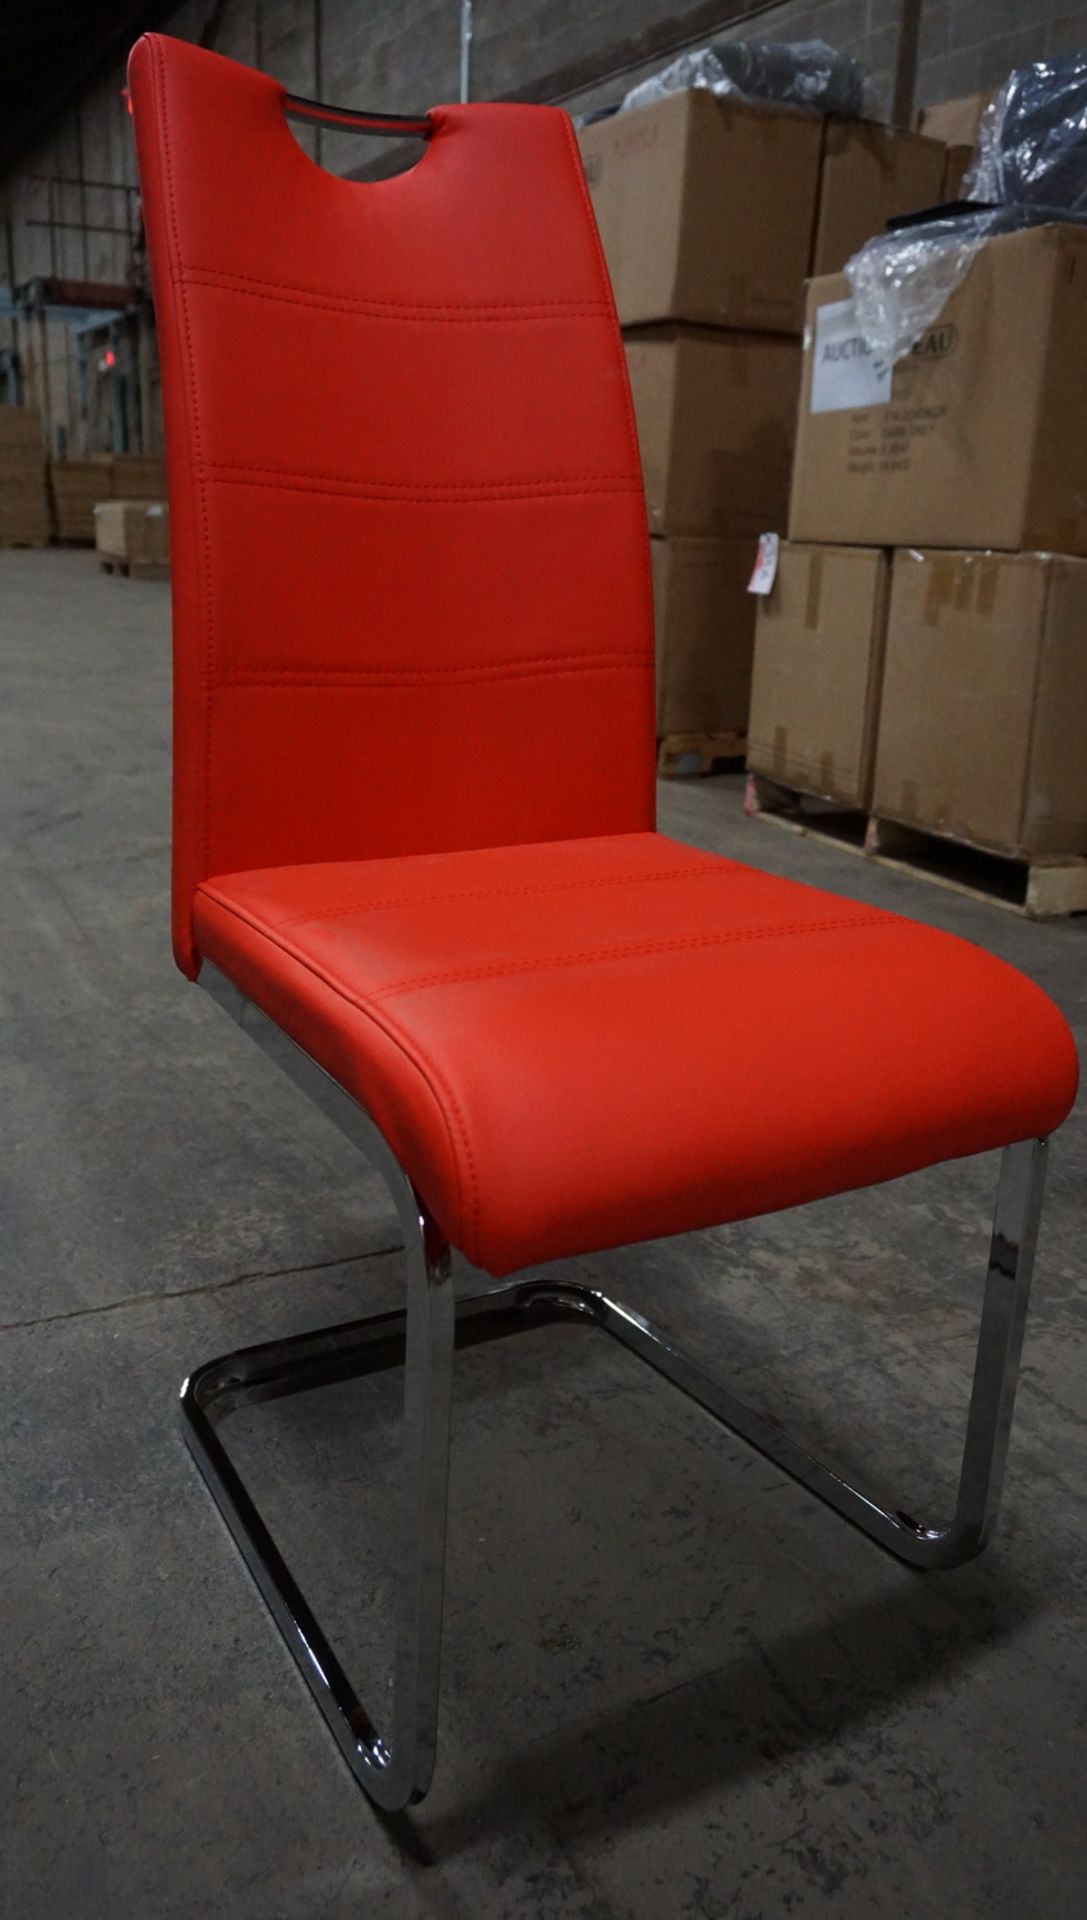 UNITS - RED PU LEATHER DINING CHAIRS W/ CHROME BASE (6353-2CHRE) (IN BOX)